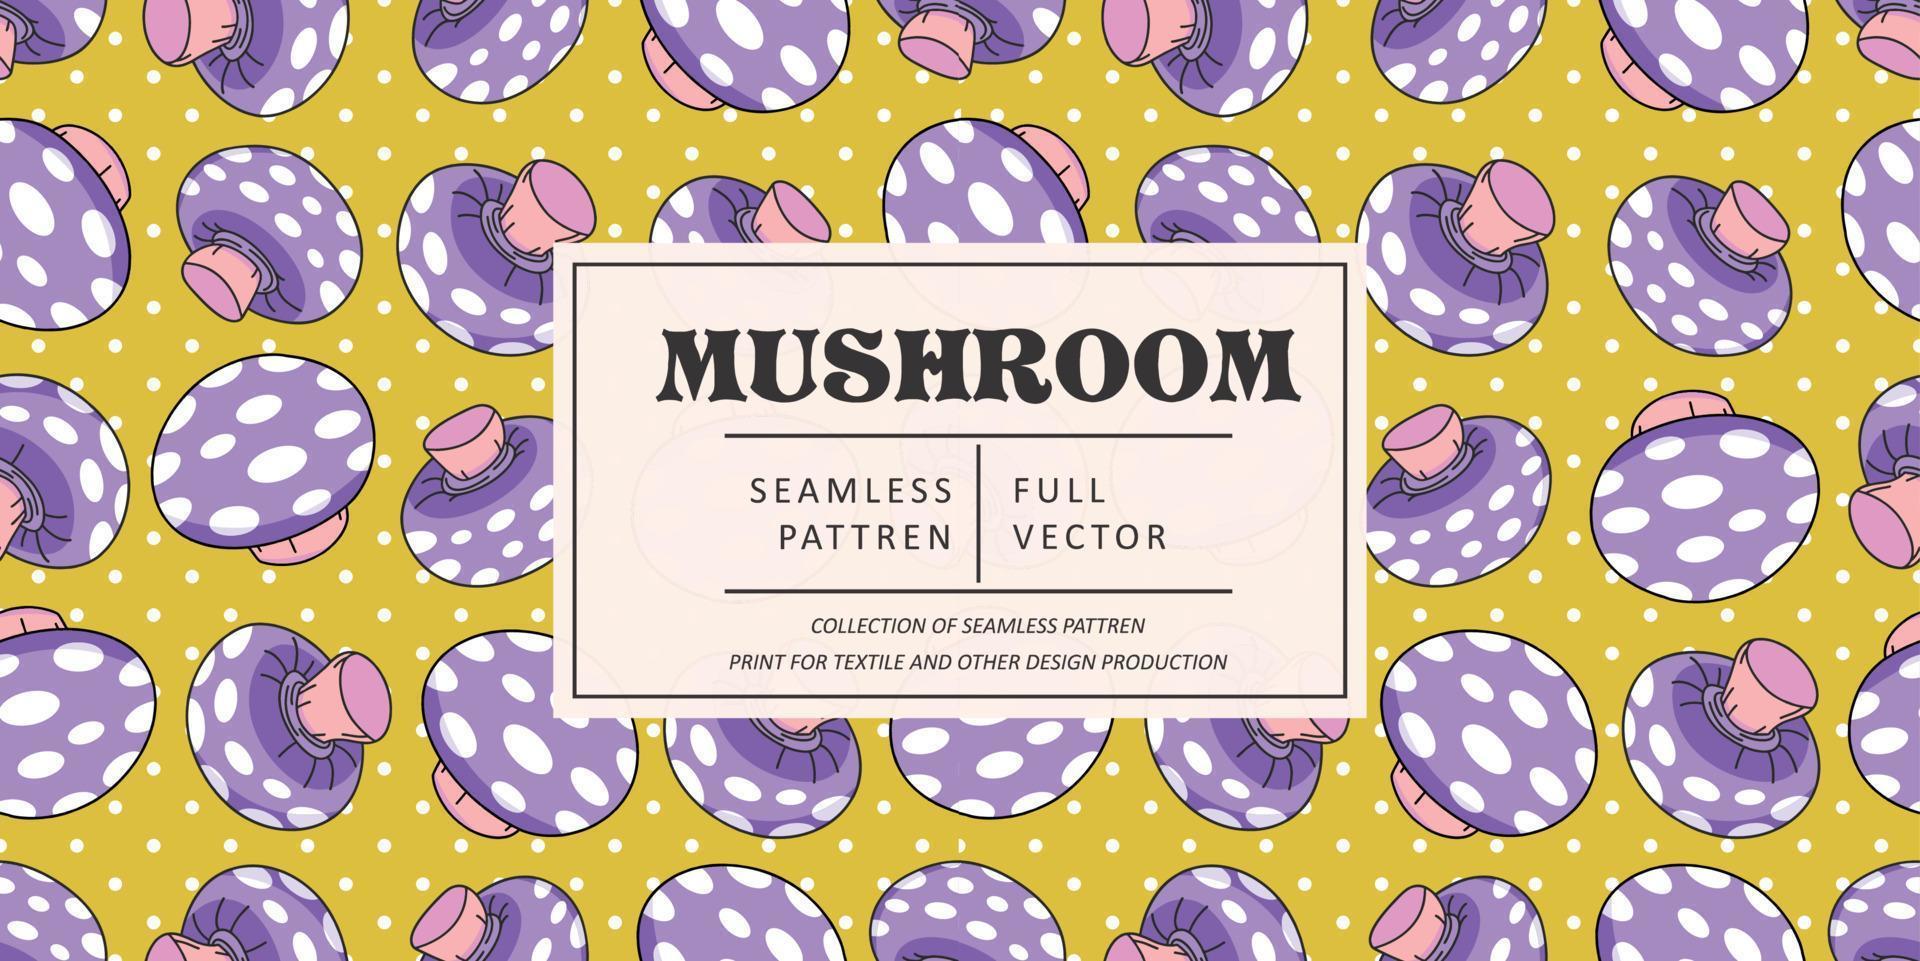 Mushroom pattern design. Autumn nature wallpaper. Wild forest pattern graphic. Mushrooms, psychedelic style background. Fantasy magic funny mushrooms vector